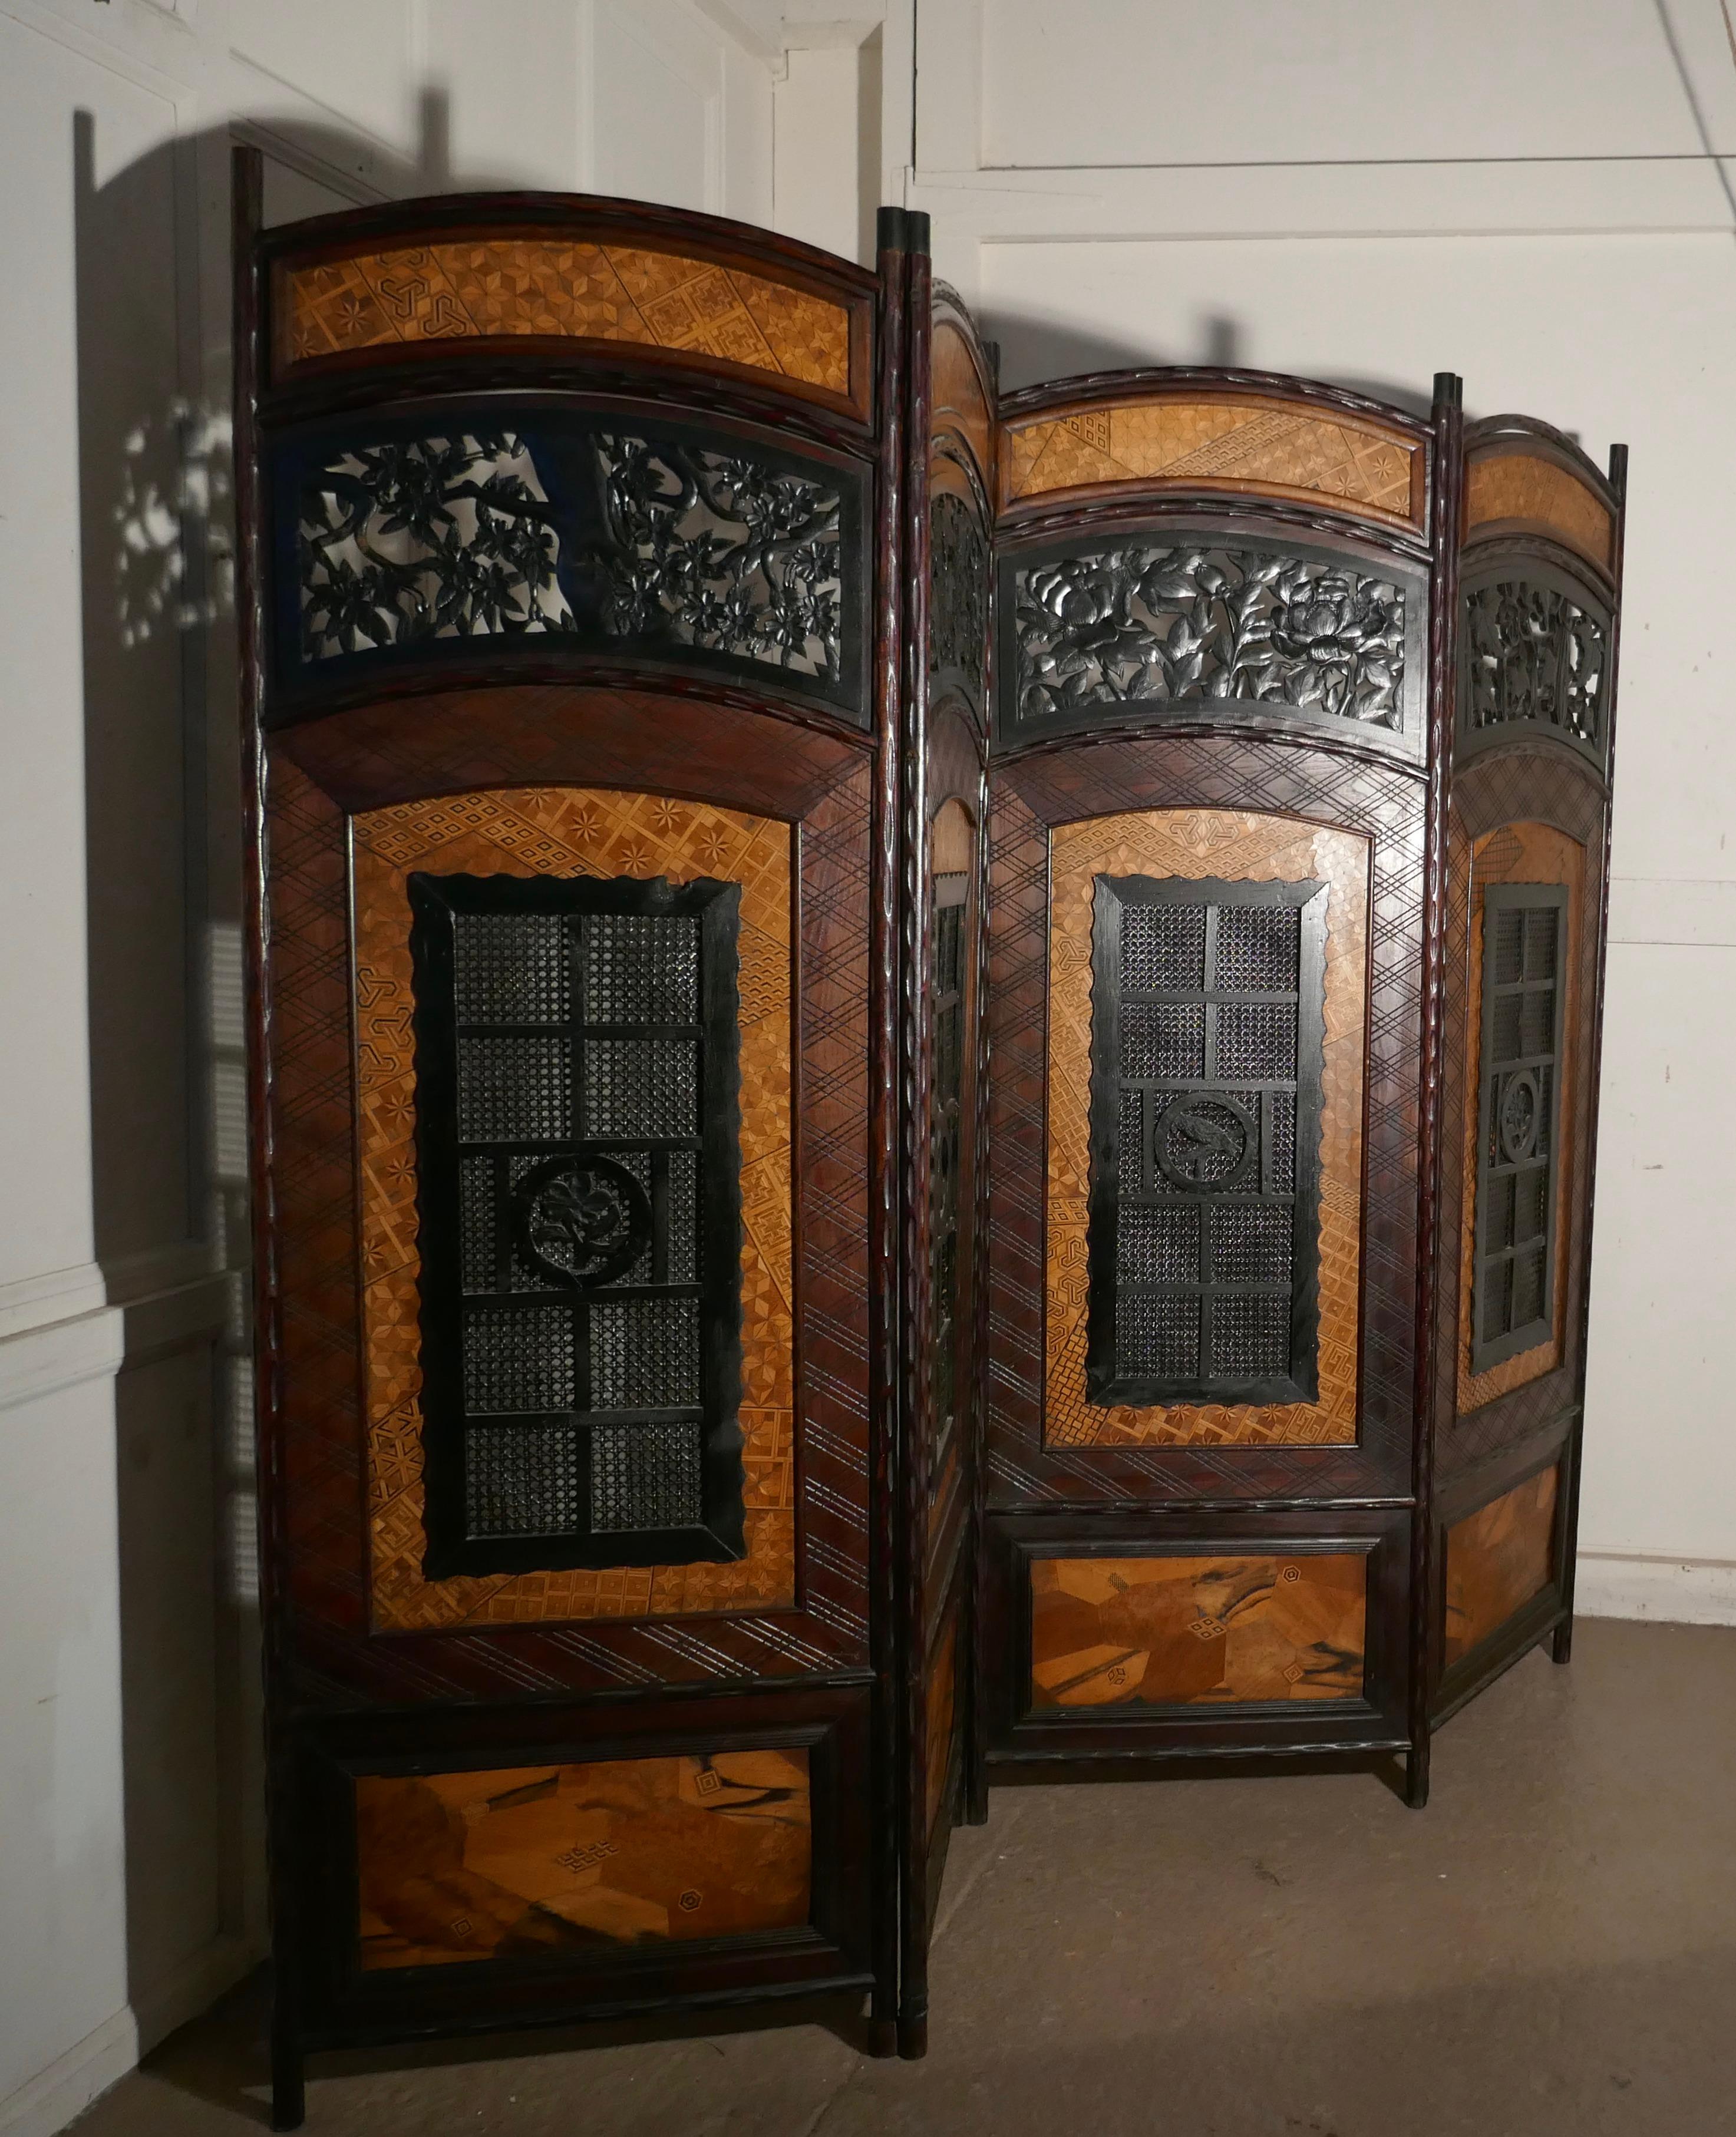 19th century Japanese Folk Art 4 fold screen, room divider

This is a heavy piece, the screen is made from many hard woods, in filigree carving, patchwork marquetry and woven flat cane
All the panels are slightly different, each panel has an